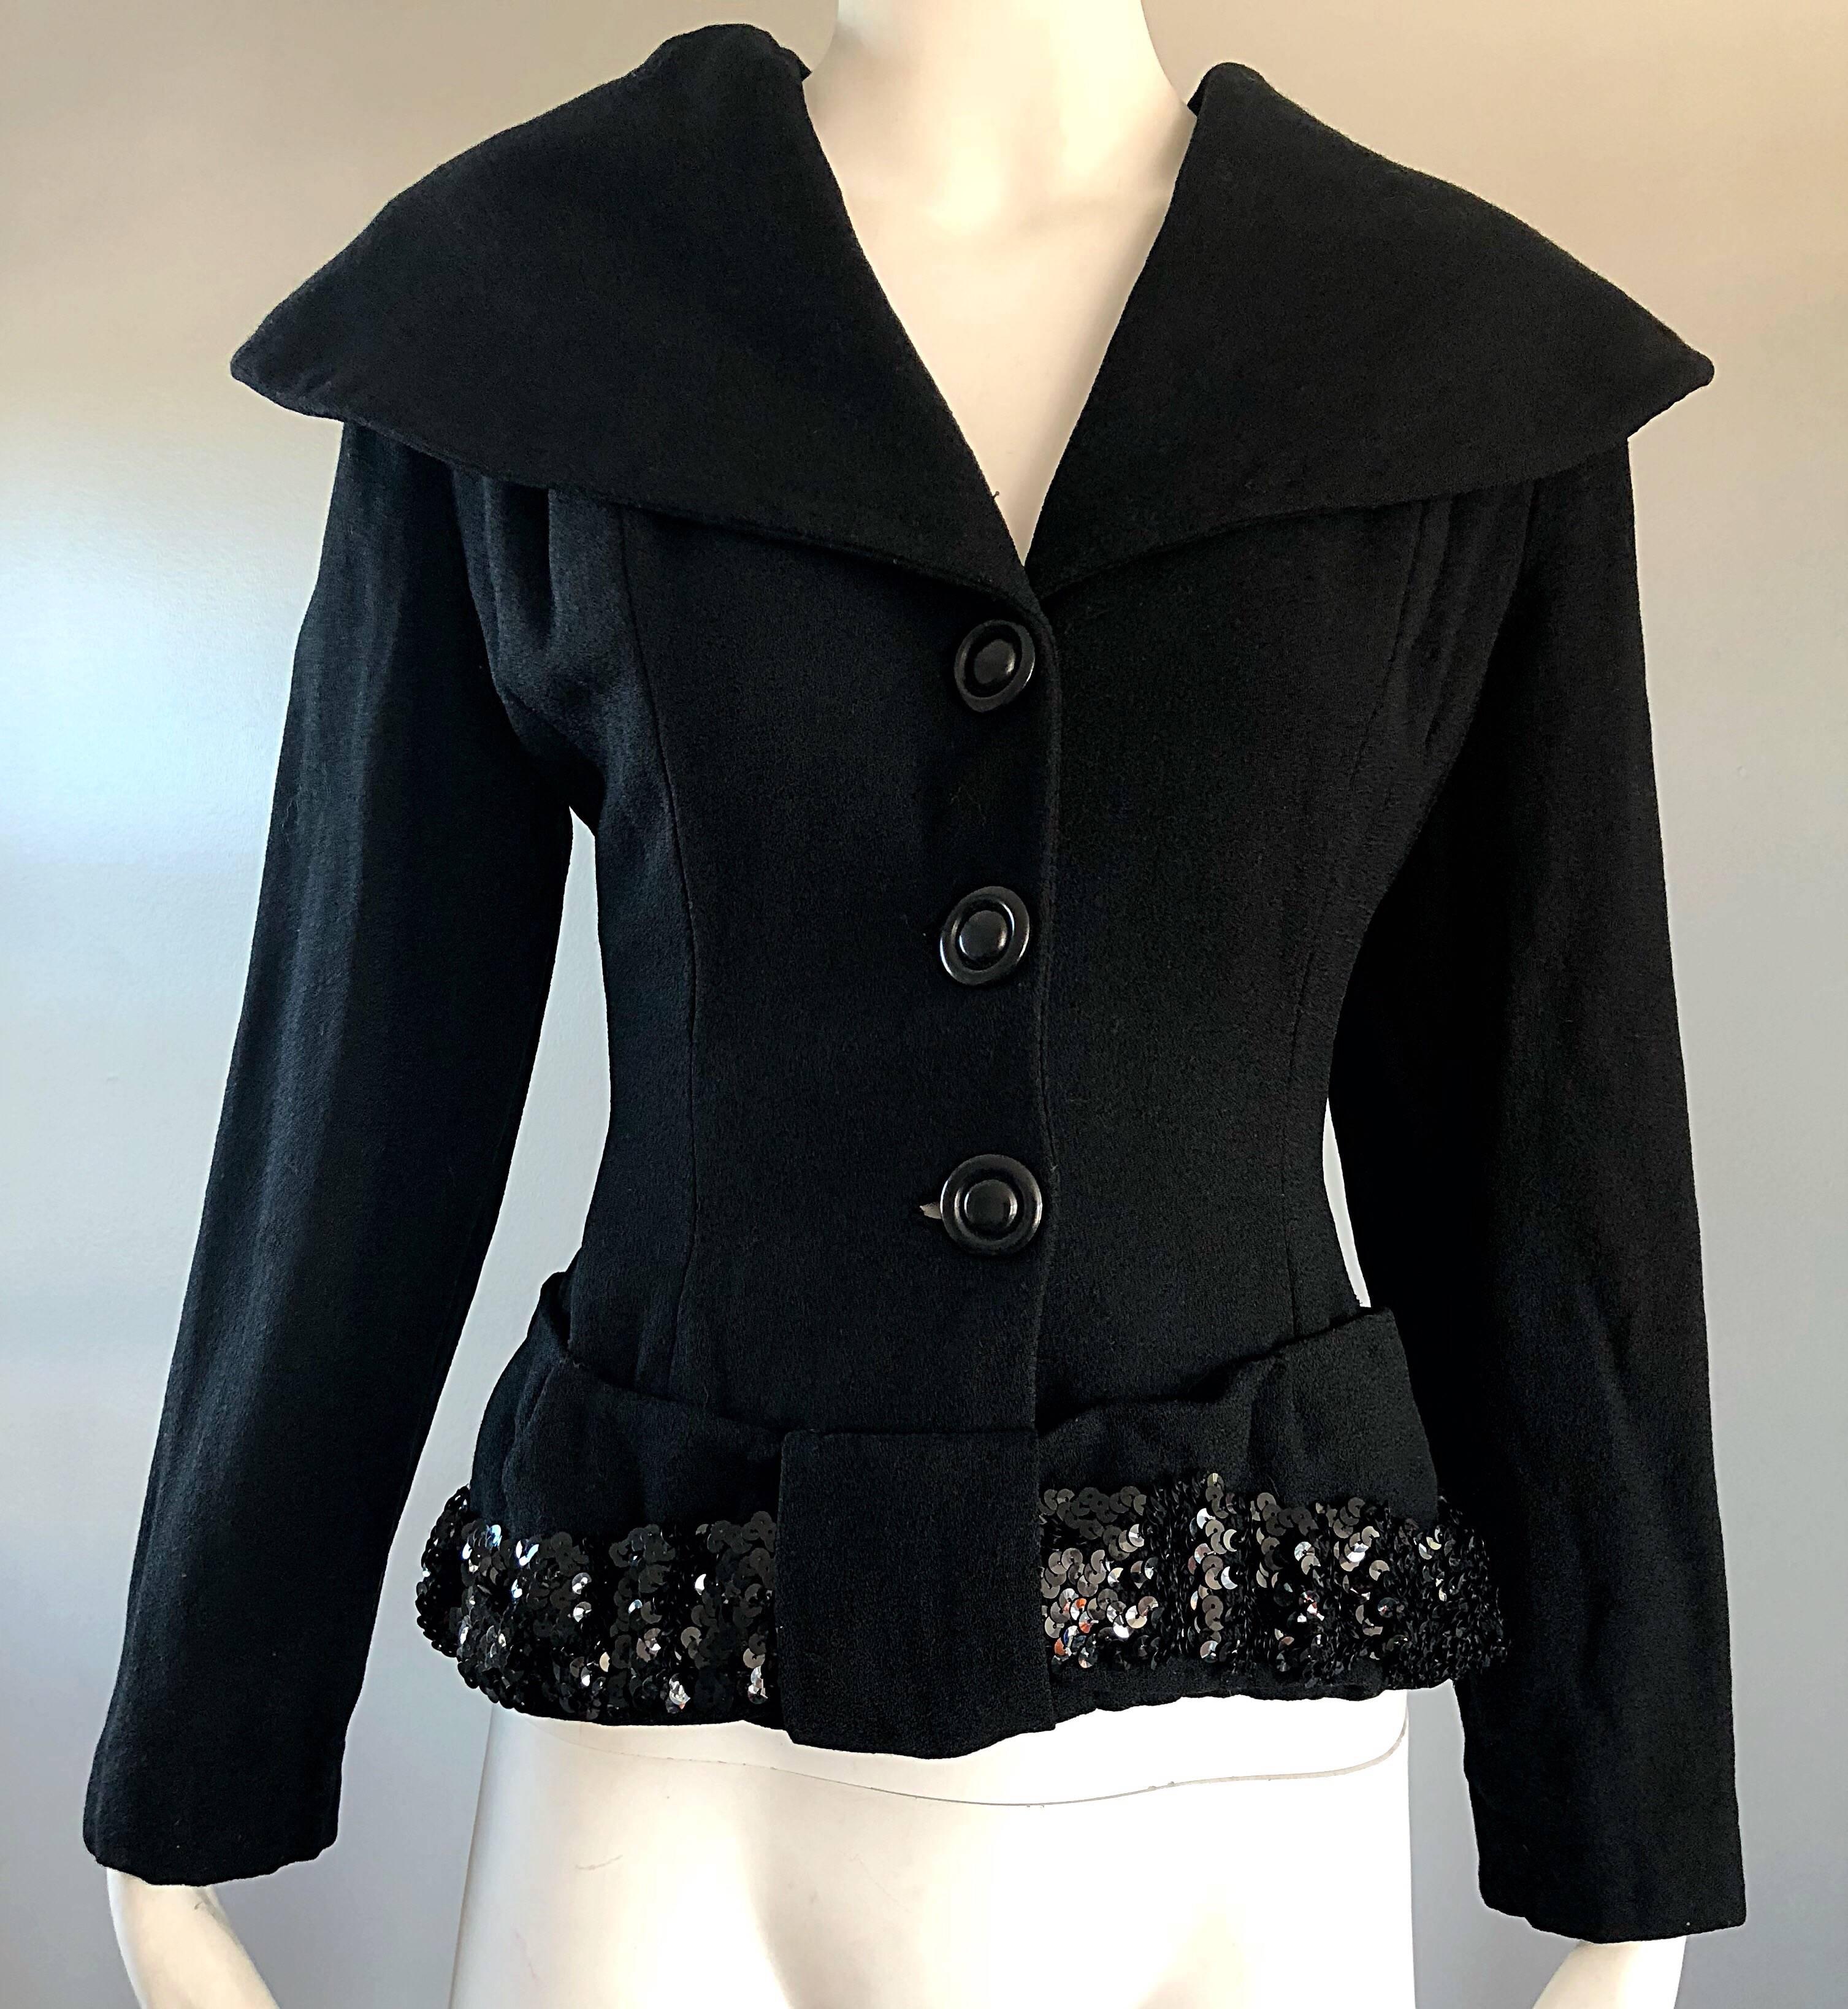 1940s Lilli Ann Gorgeous Black Wool + Sequins Dramatic Vintage 40s Jacket Coat In Excellent Condition For Sale In San Diego, CA